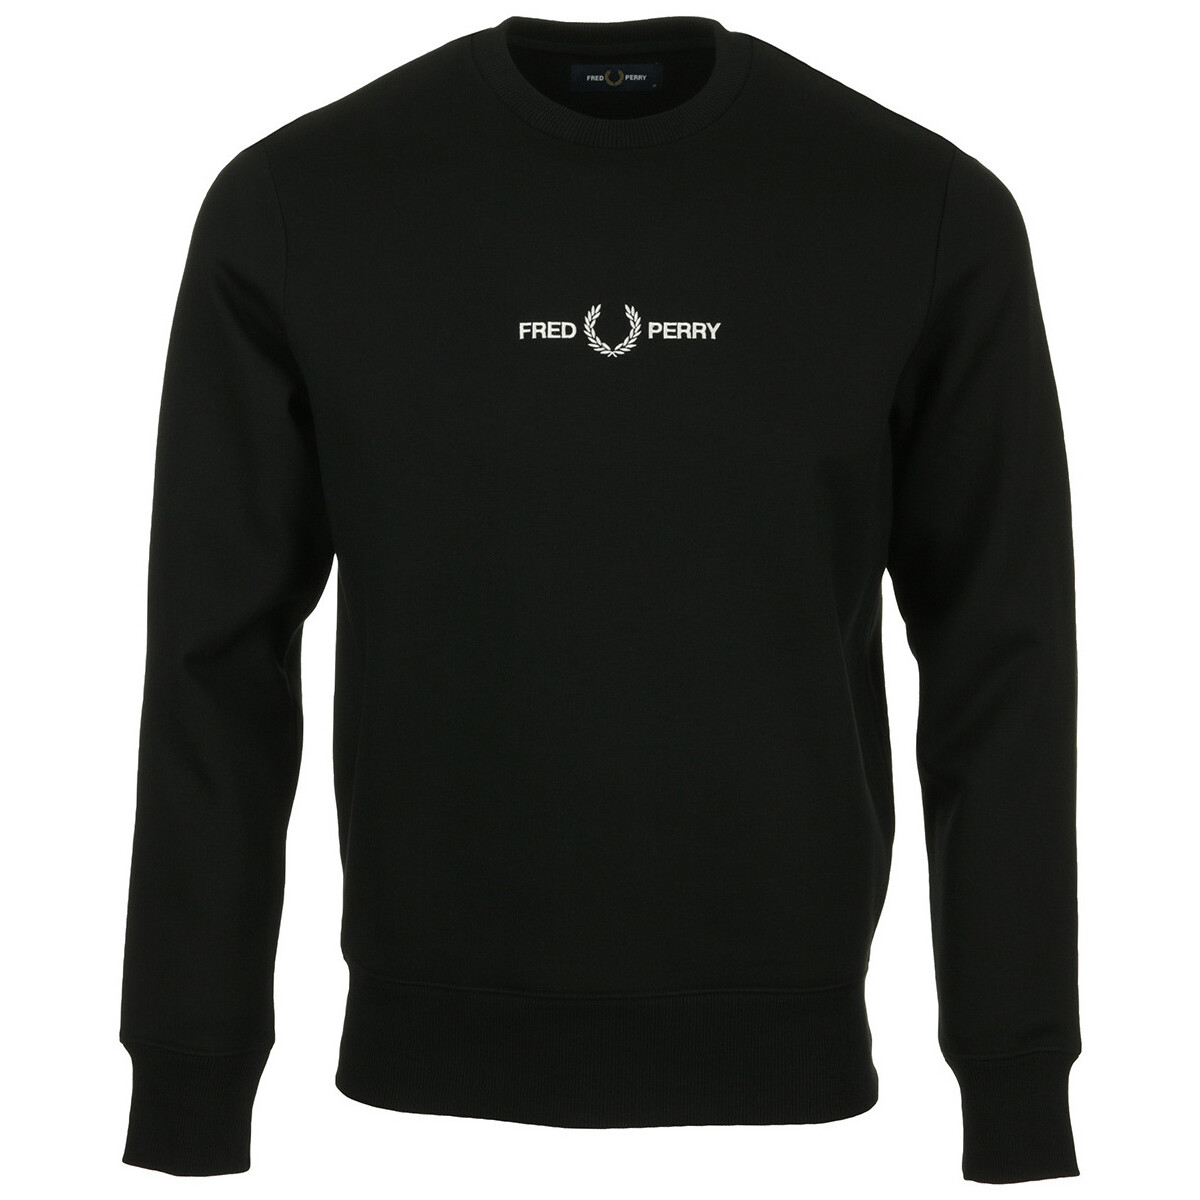 Vêtements Homme Sweats Fred Perry Embroidered Sweatshirt Noir